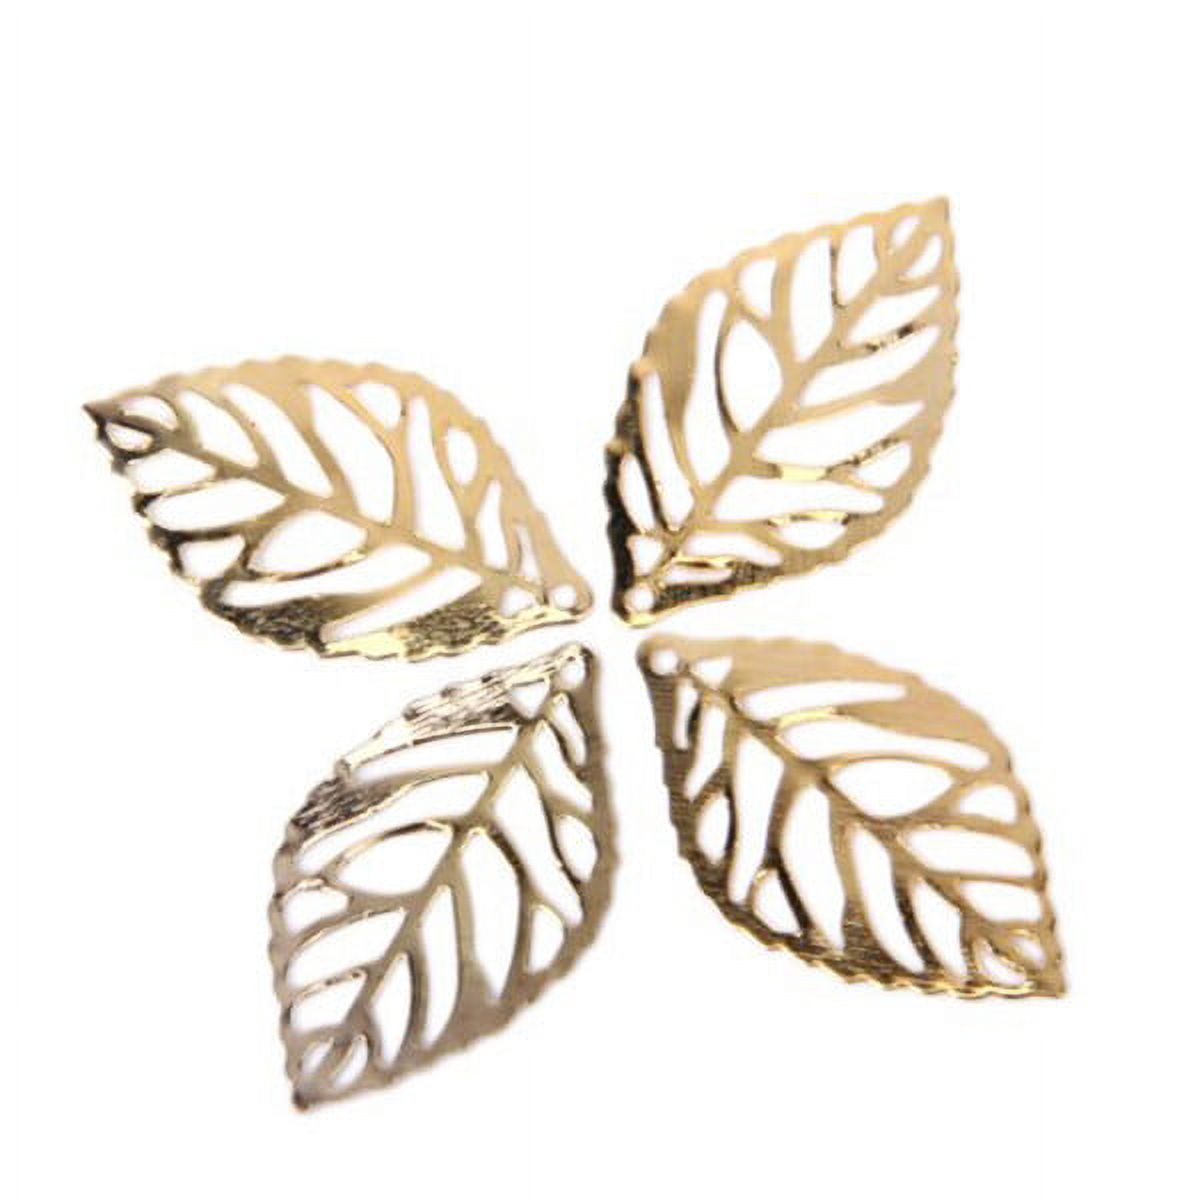 Leaf Tree Charms Jewelry Making Gold Leaves Metal Fall Crafts Embellishments Hollow Pierced Diy Alloy Decor Charm - image 3 of 5